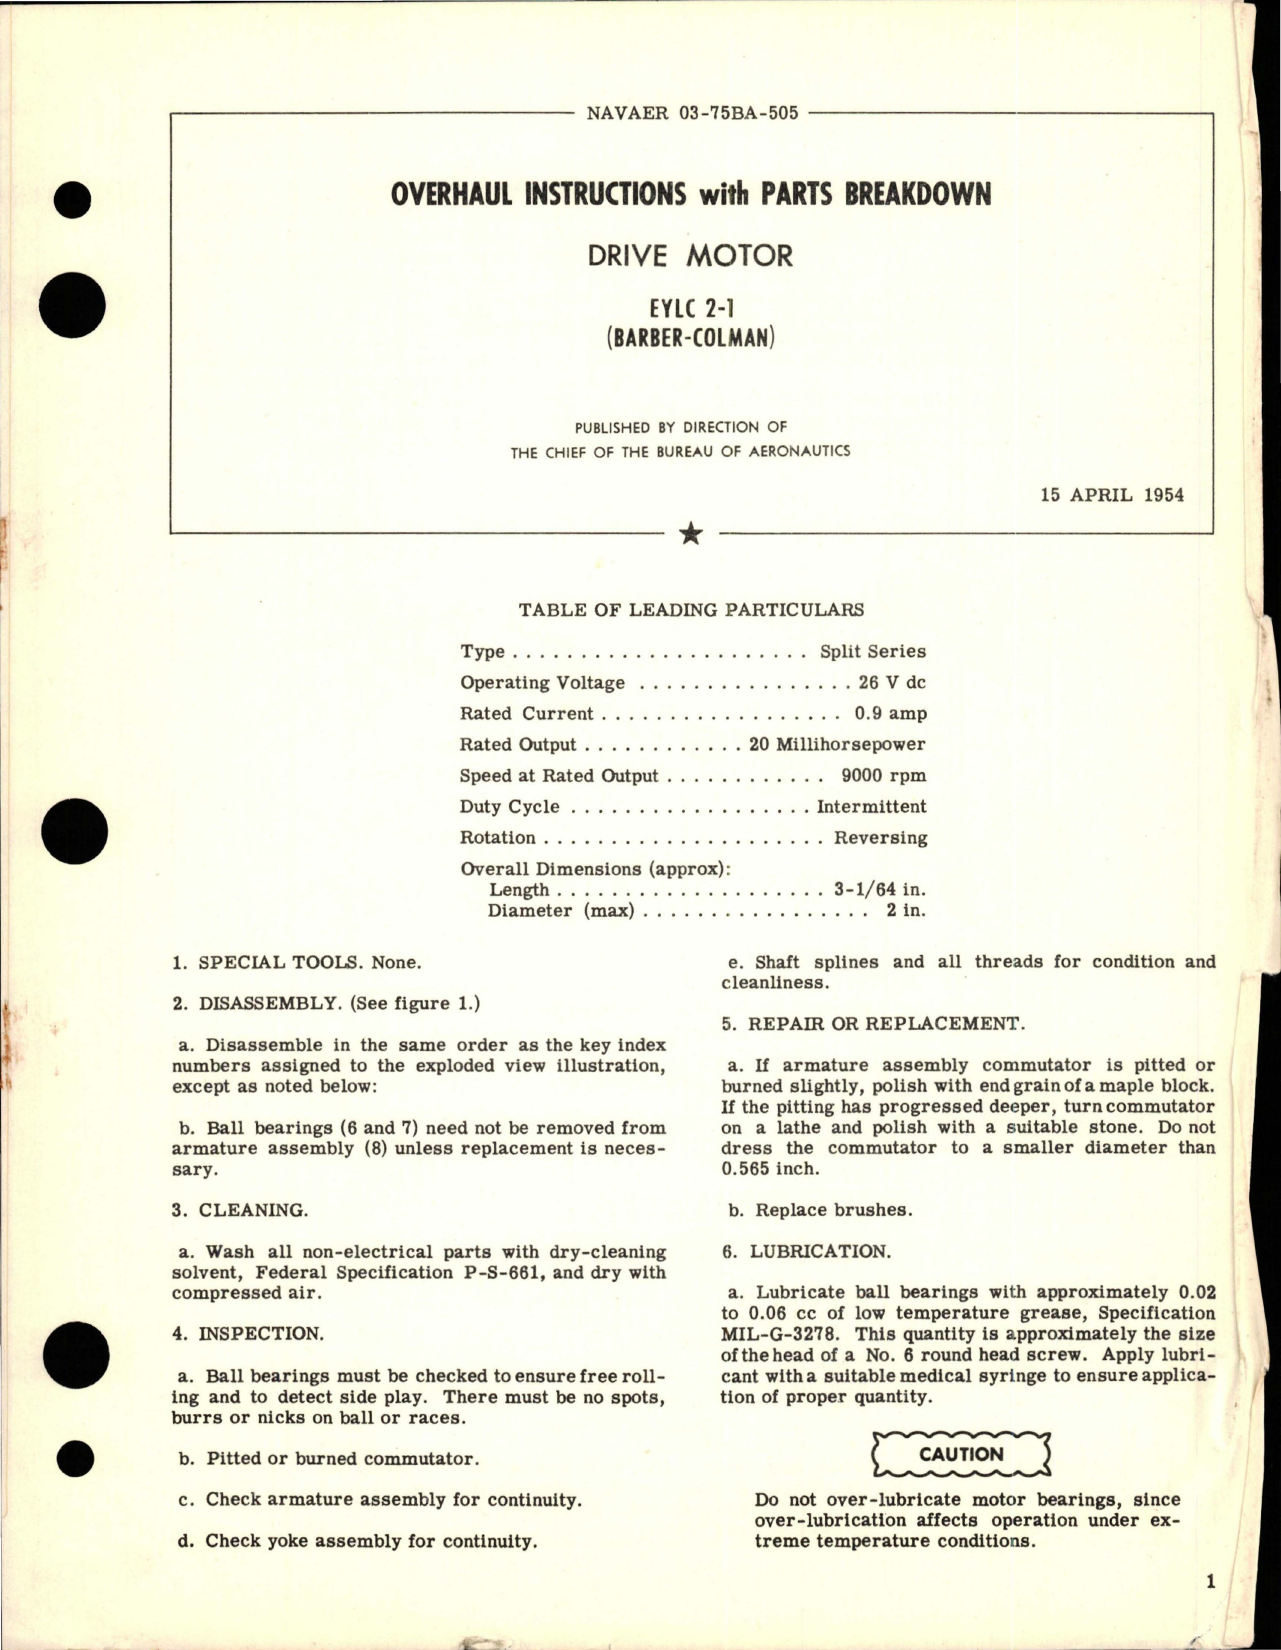 Sample page 1 from AirCorps Library document: Overhaul Instructions with Parts Breakdown for Drive Motor - EYLC 2-1